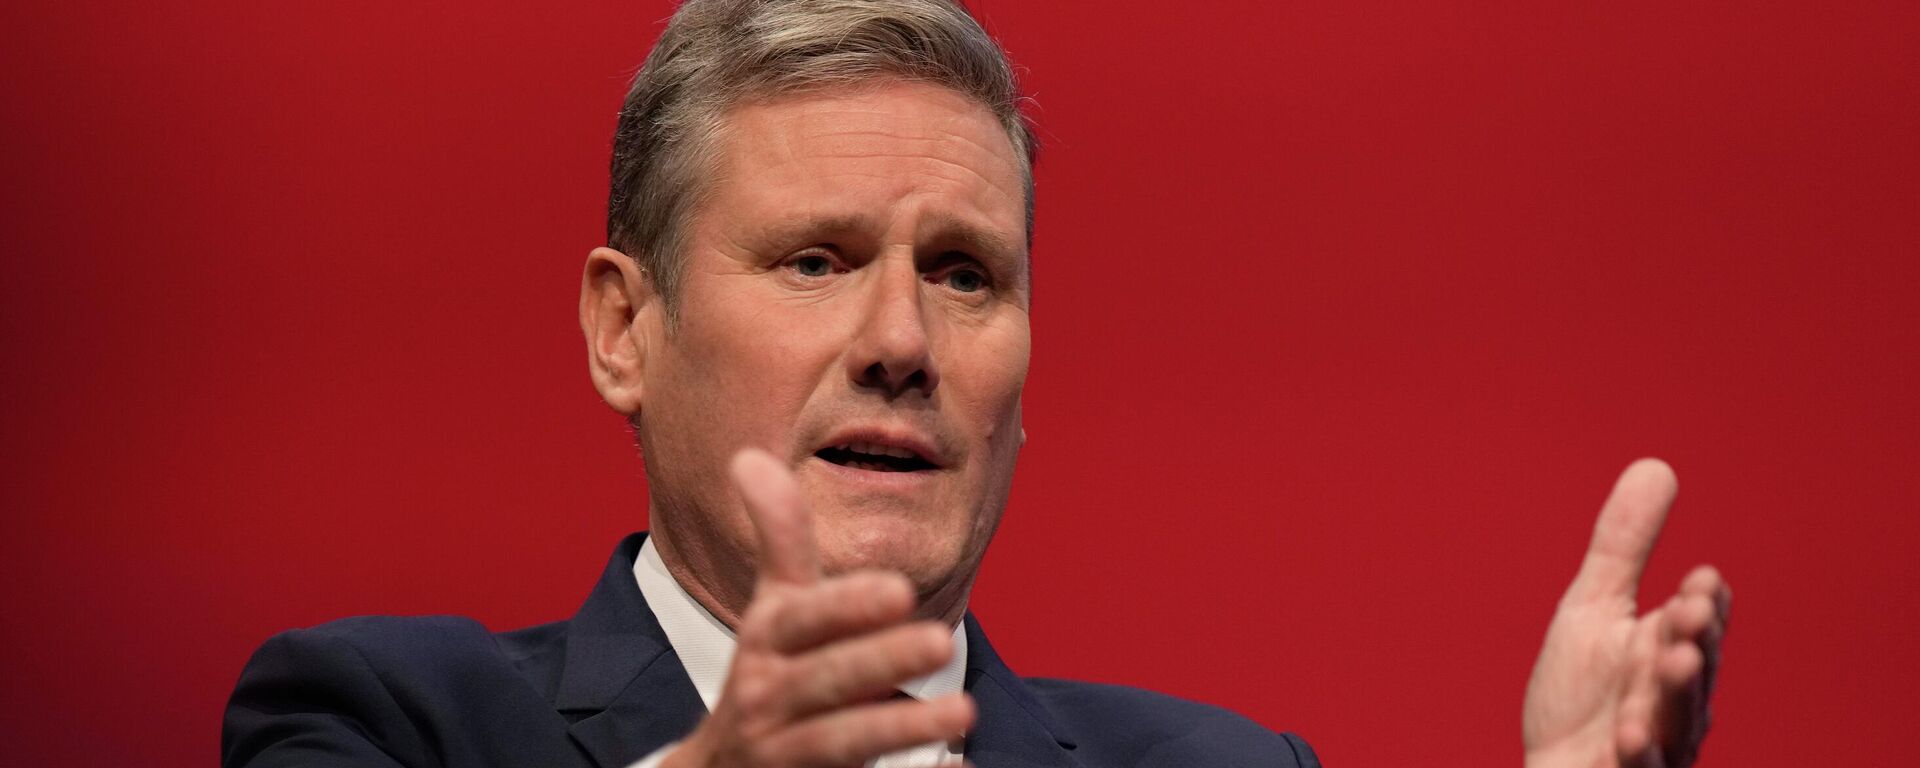 Leader of the British Labour Party Keir Starmer gestures as he makes his keynote speech at the annual party conference in Brighton, England, Sept. 29, 2021 - Sputnik International, 1920, 13.05.2022